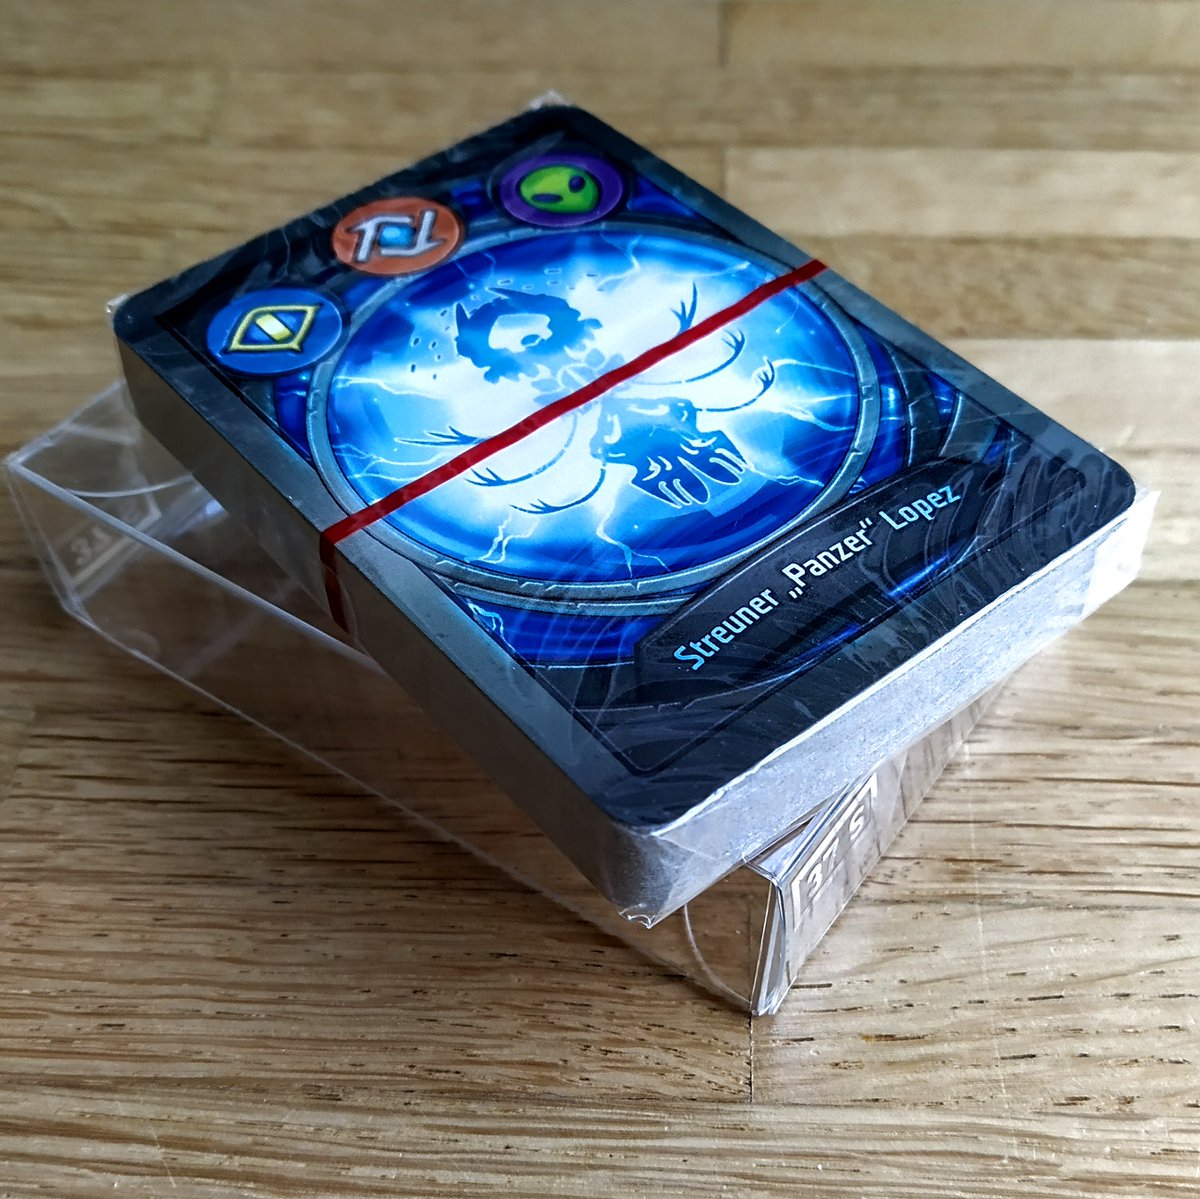 Getting into a new #KeyForge deck mentally isn't always easy, but you have time and you get used to it over time.